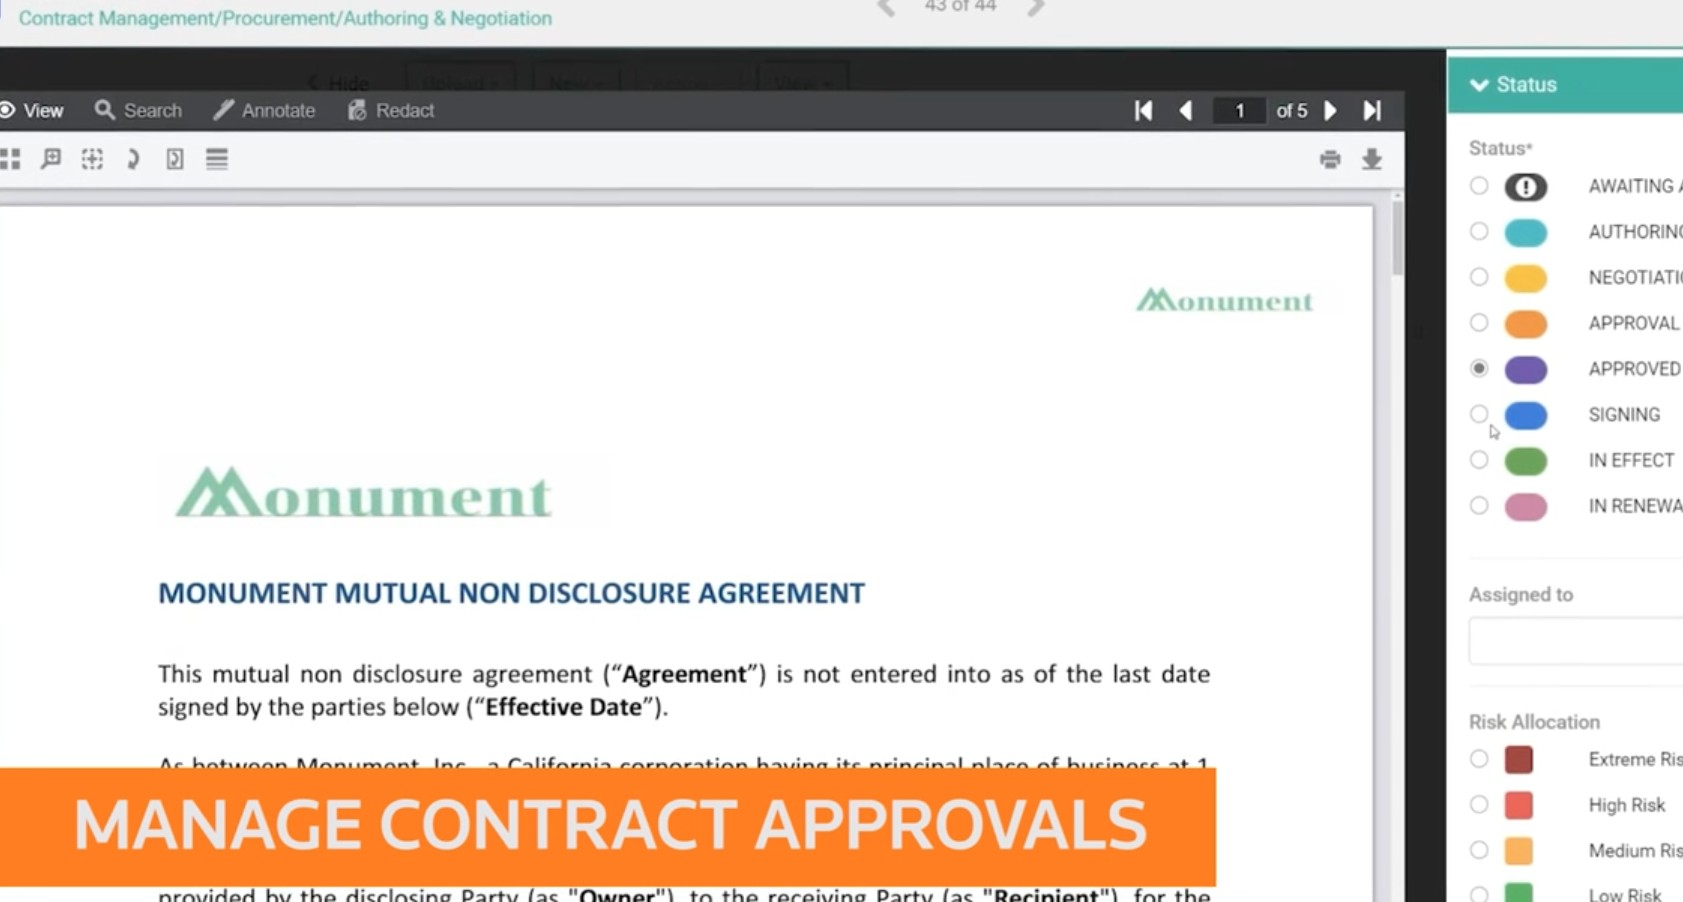 Contract management on HighQ